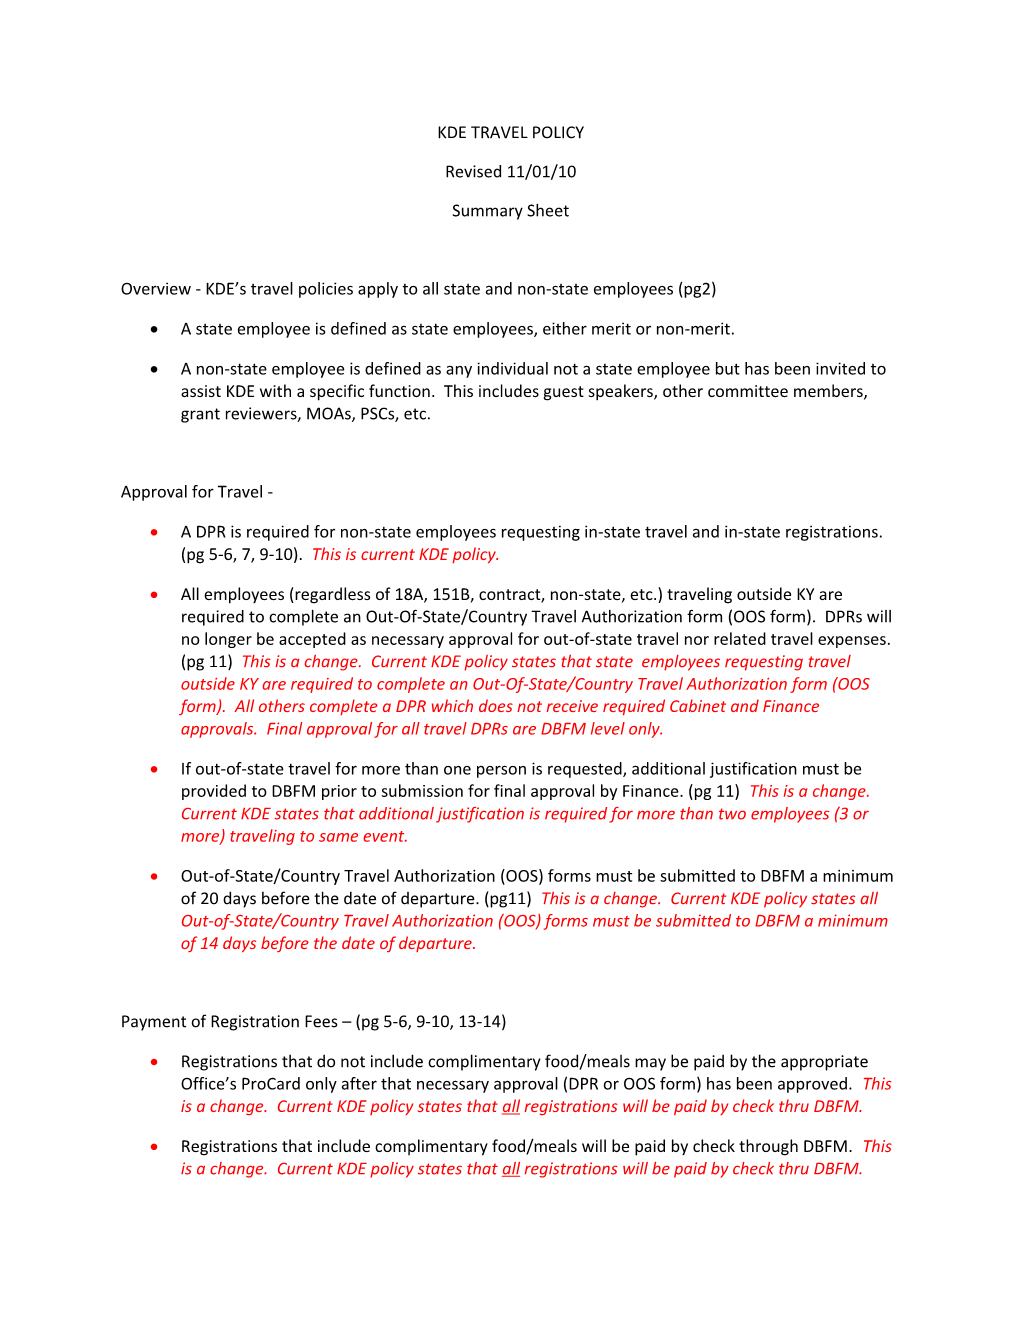 Overview - KDE S Travel Policies Apply to All State and Non-State Employees (Pg2)